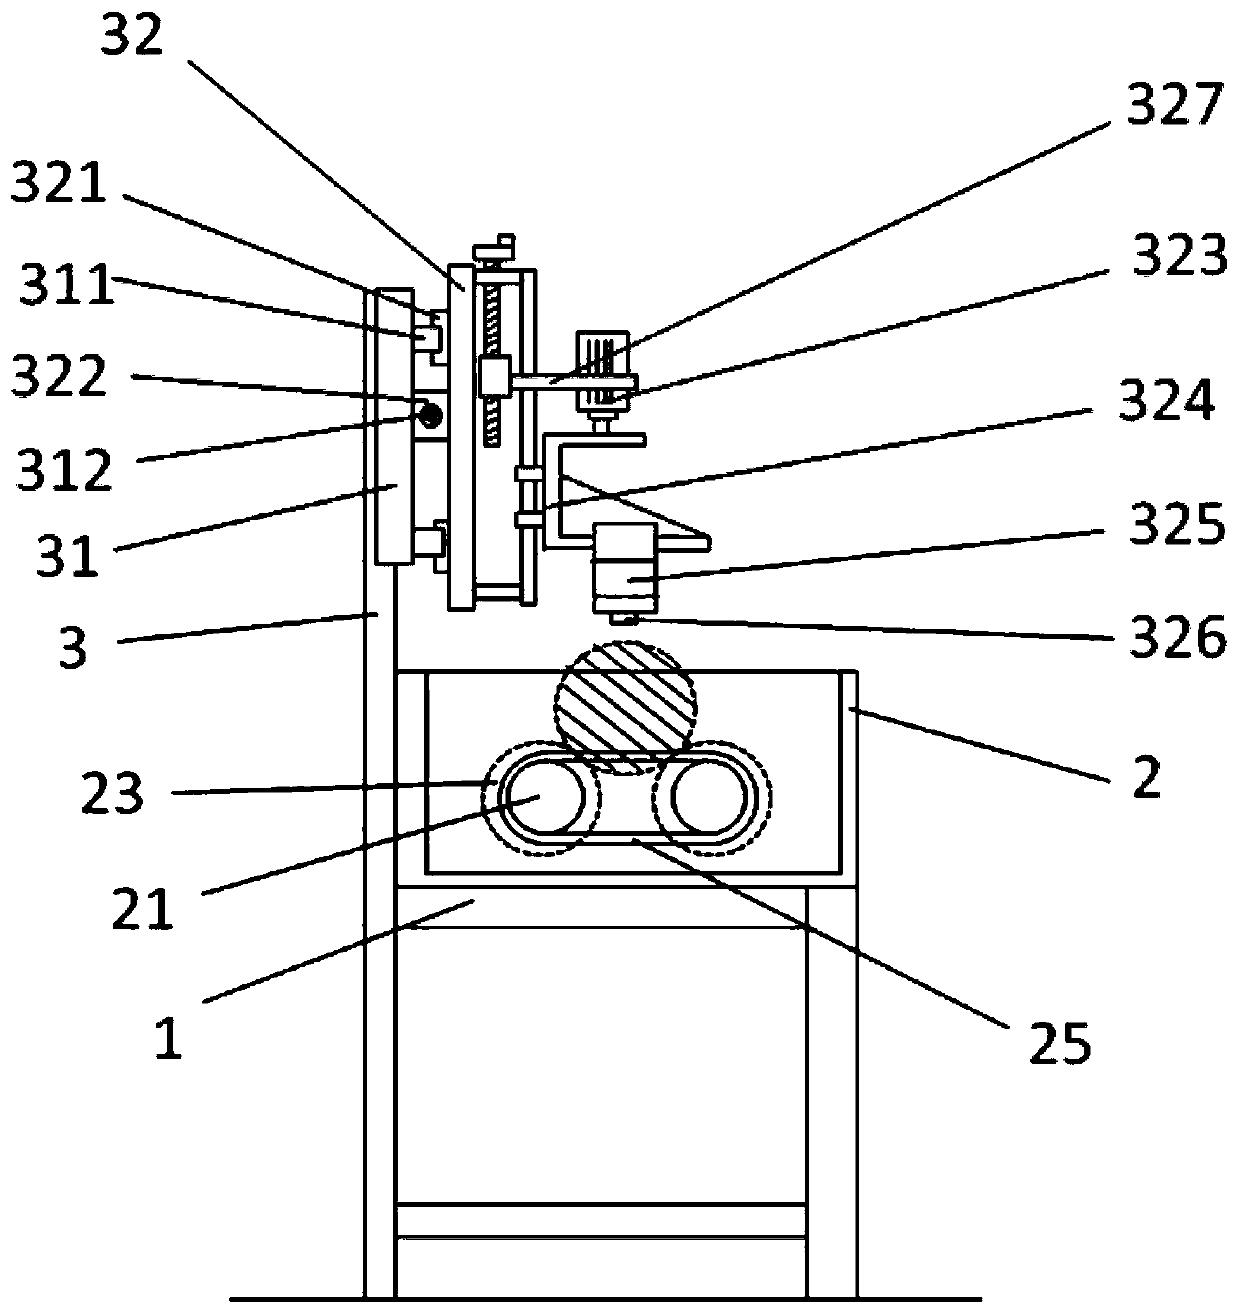 Ultrasonic nondestructive testing device for shaft parts